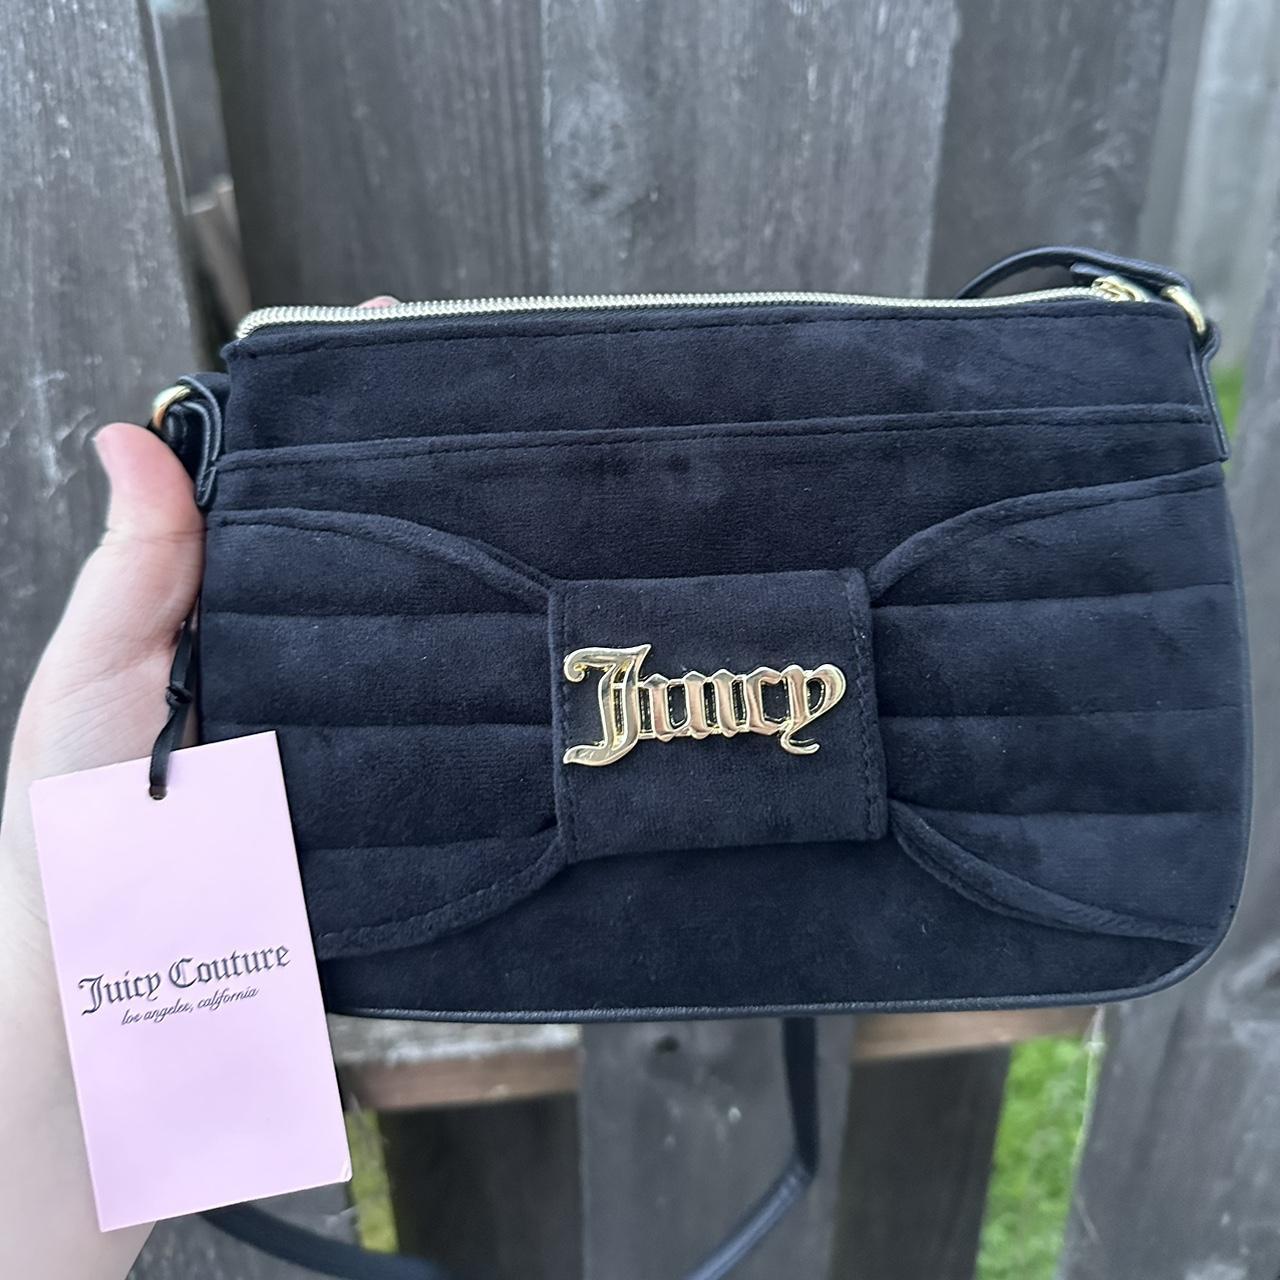 Juicy Couture 💗 | Bags, Girly bags, Pretty bags